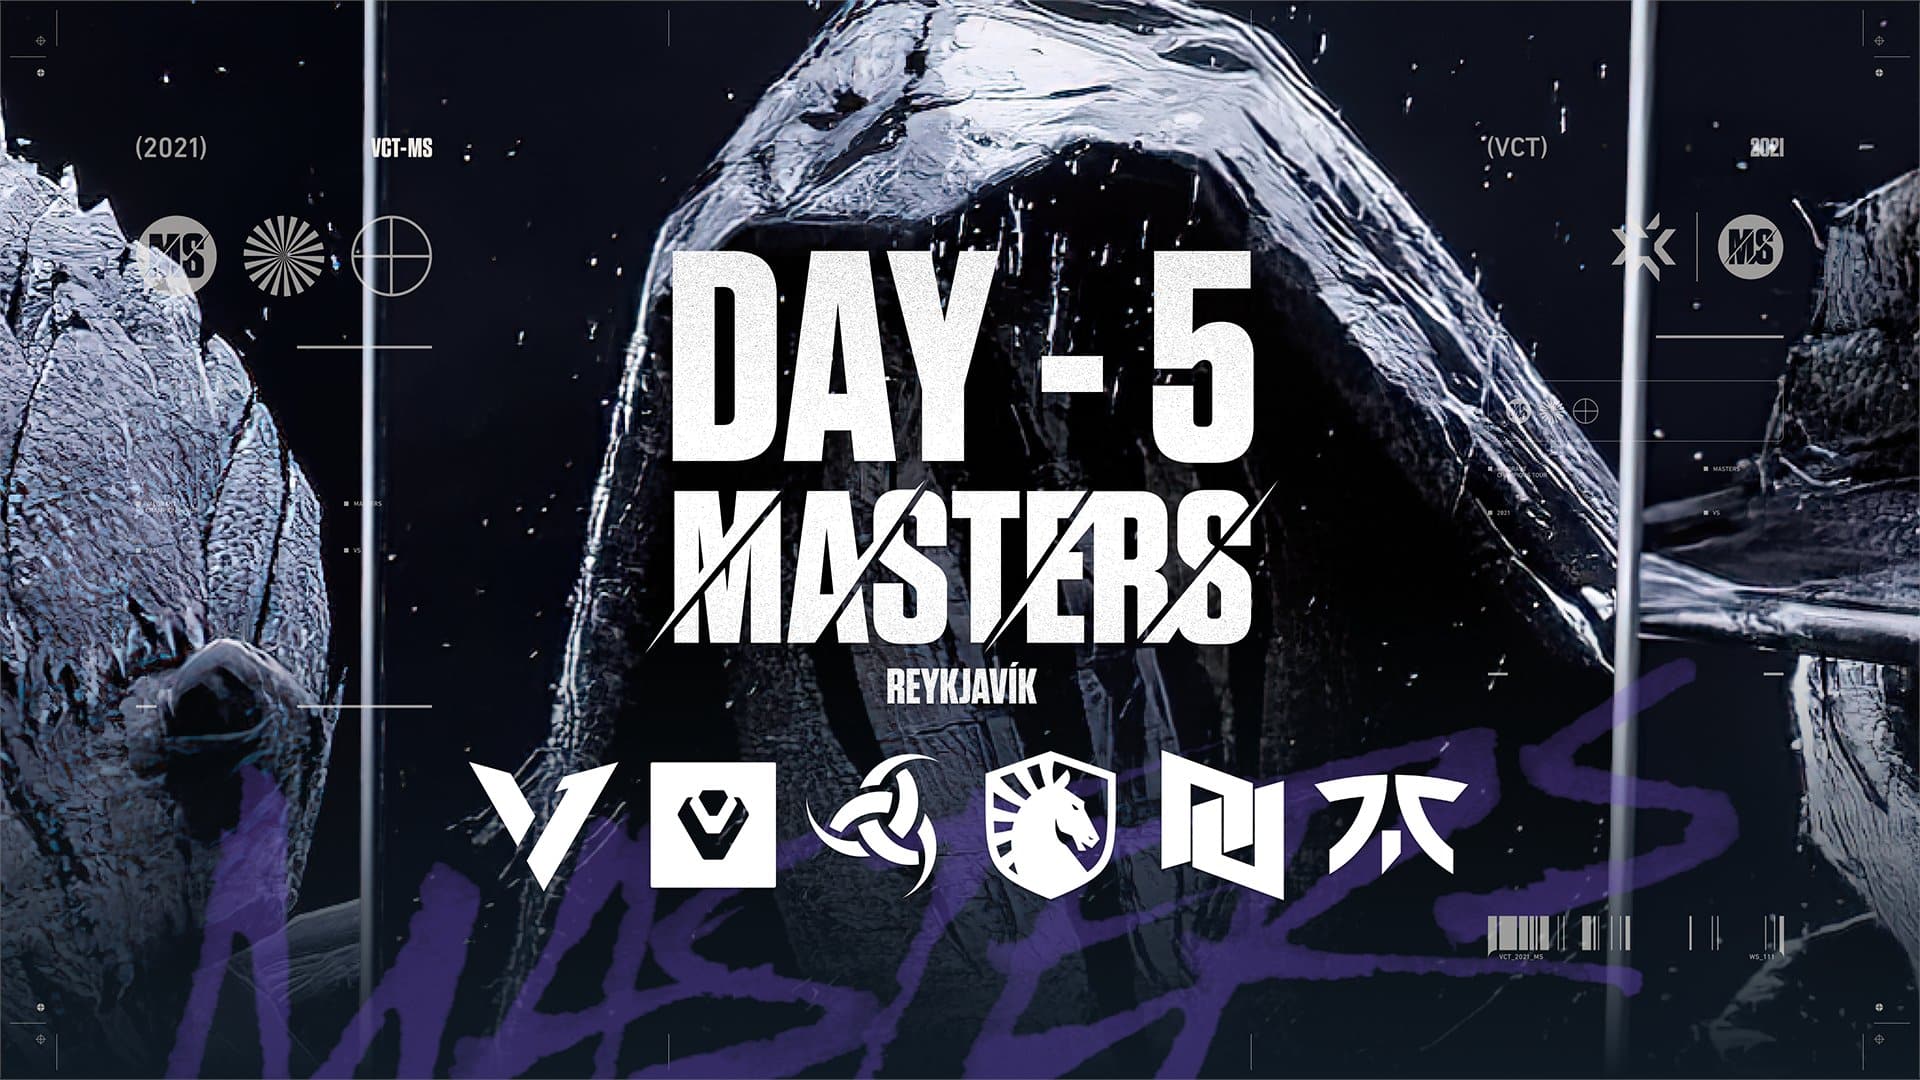 VCT Stage 2 Masters Iceland Day 5 preview